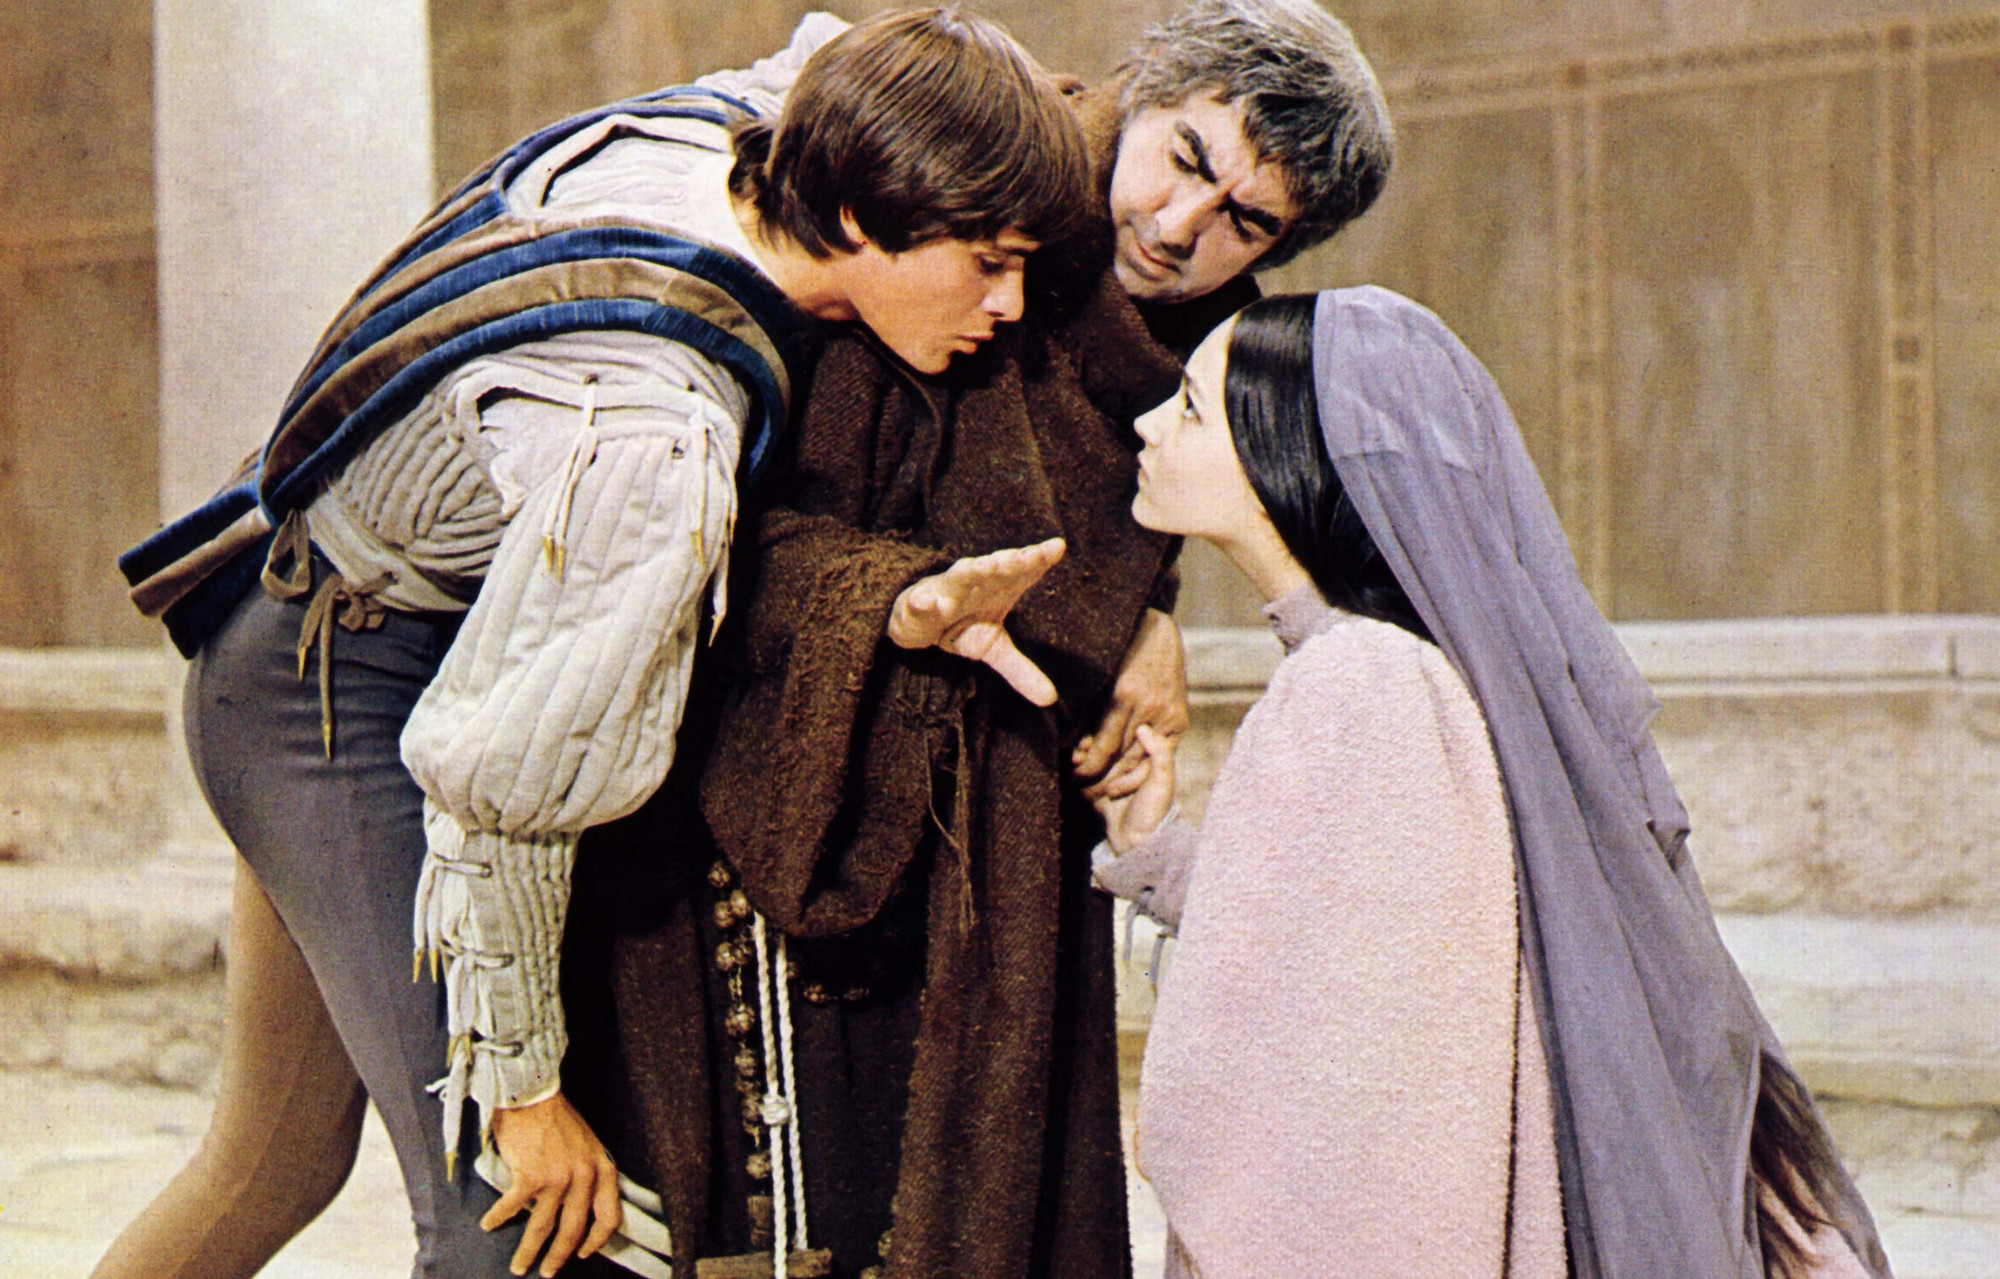 Romeo and Juliet. 1968. Directed by Franco Zeffirelli